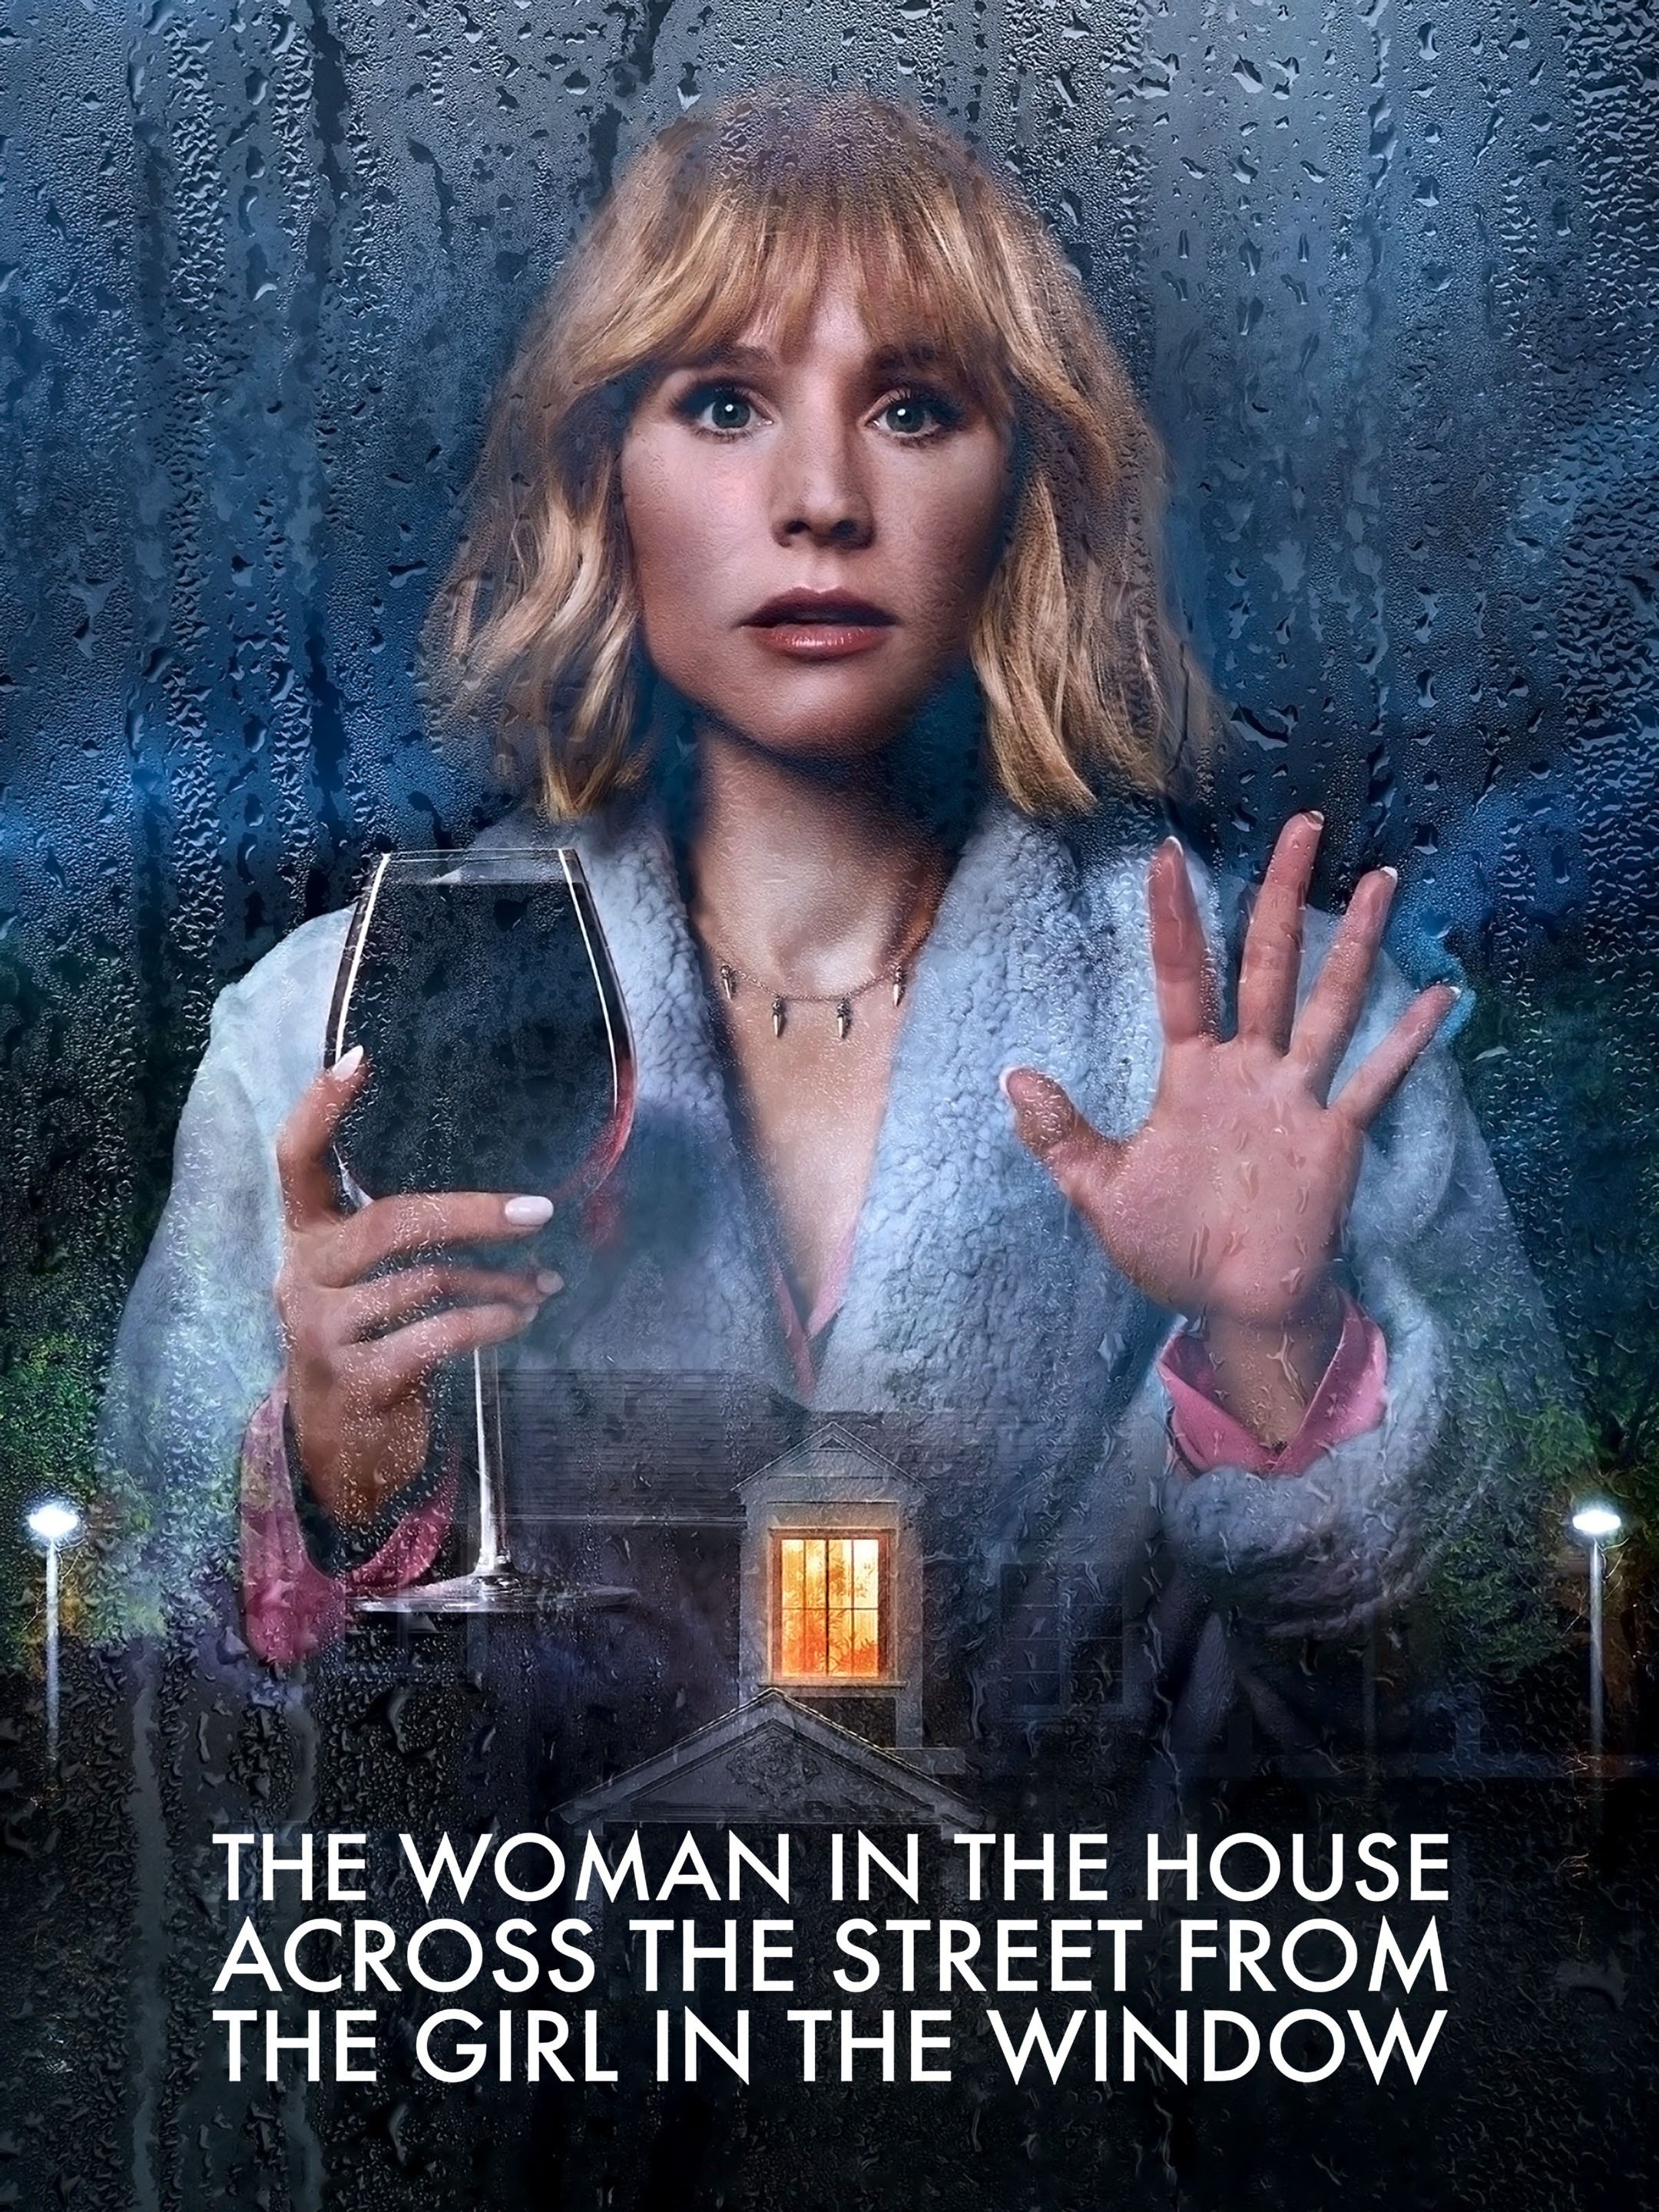 The Woman in the Window Ending Explained